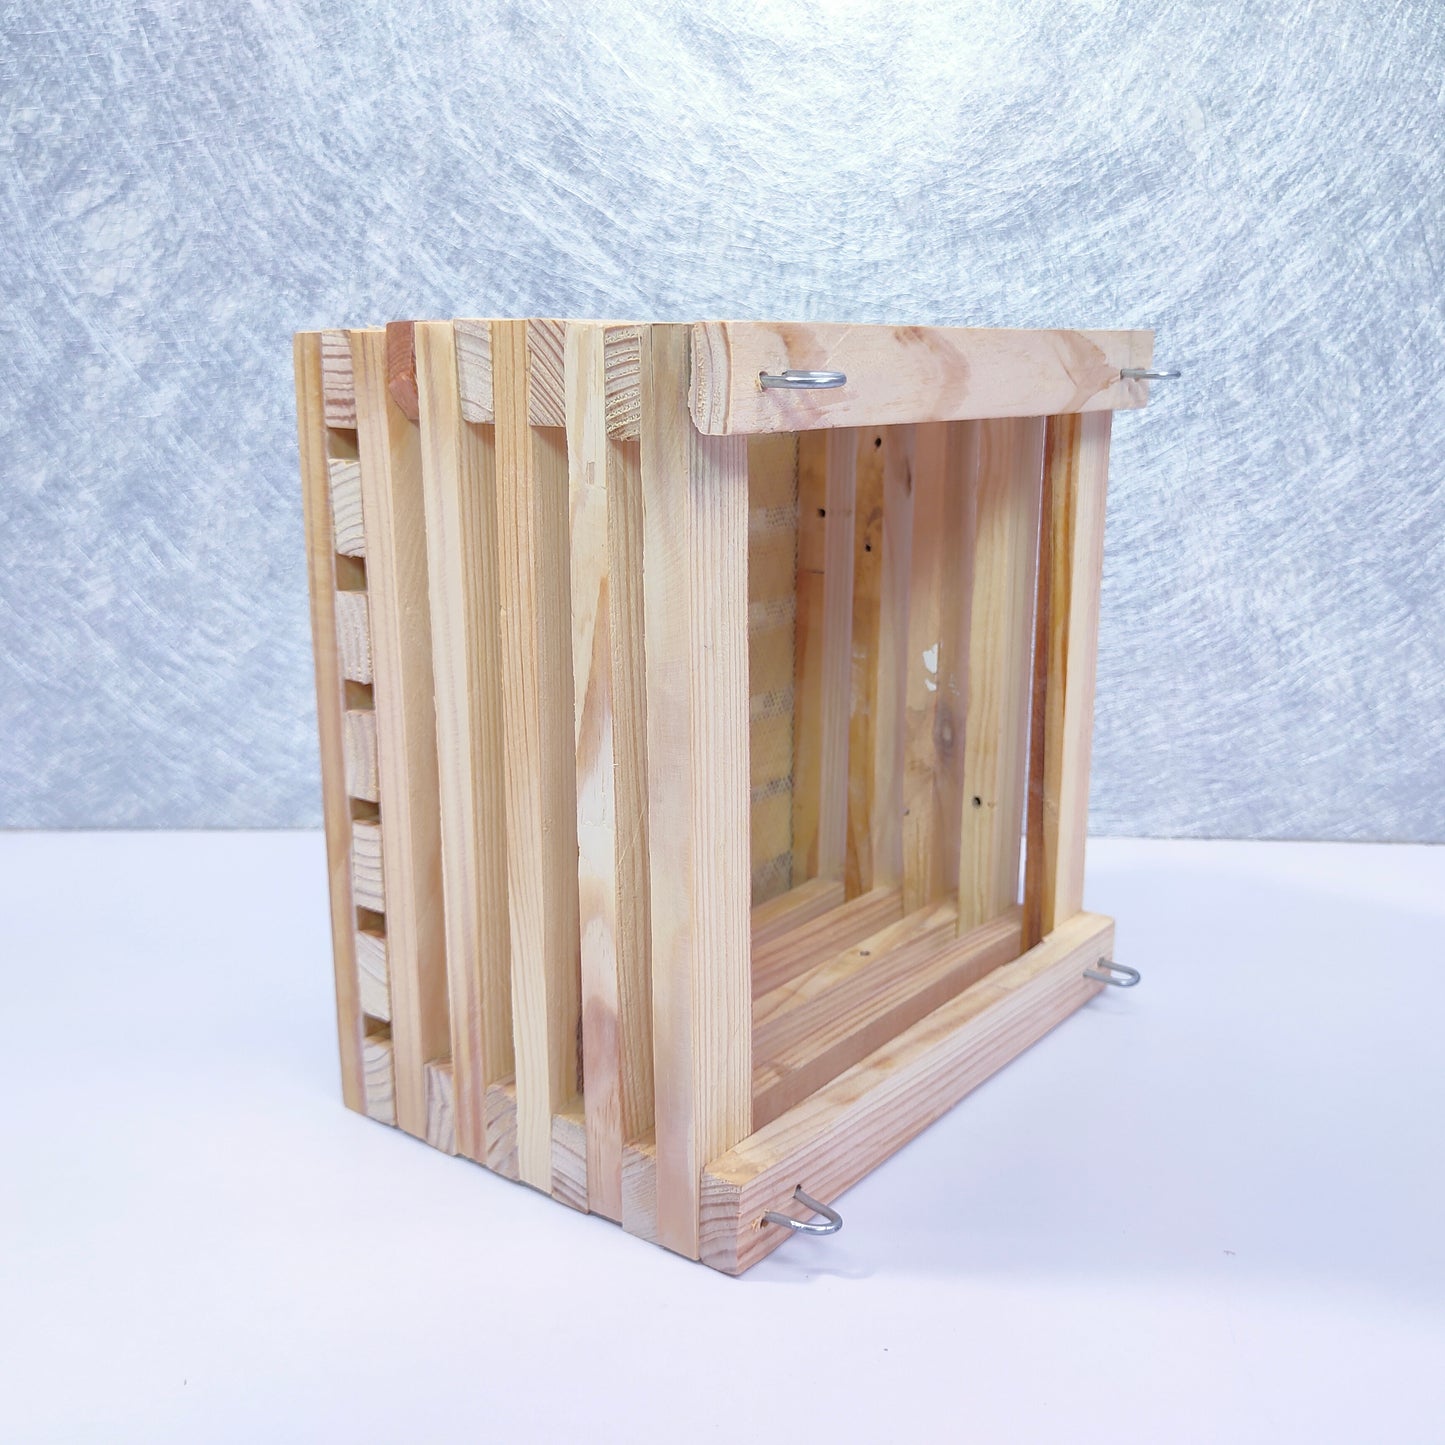 8 inch Wooden Hanging Planter